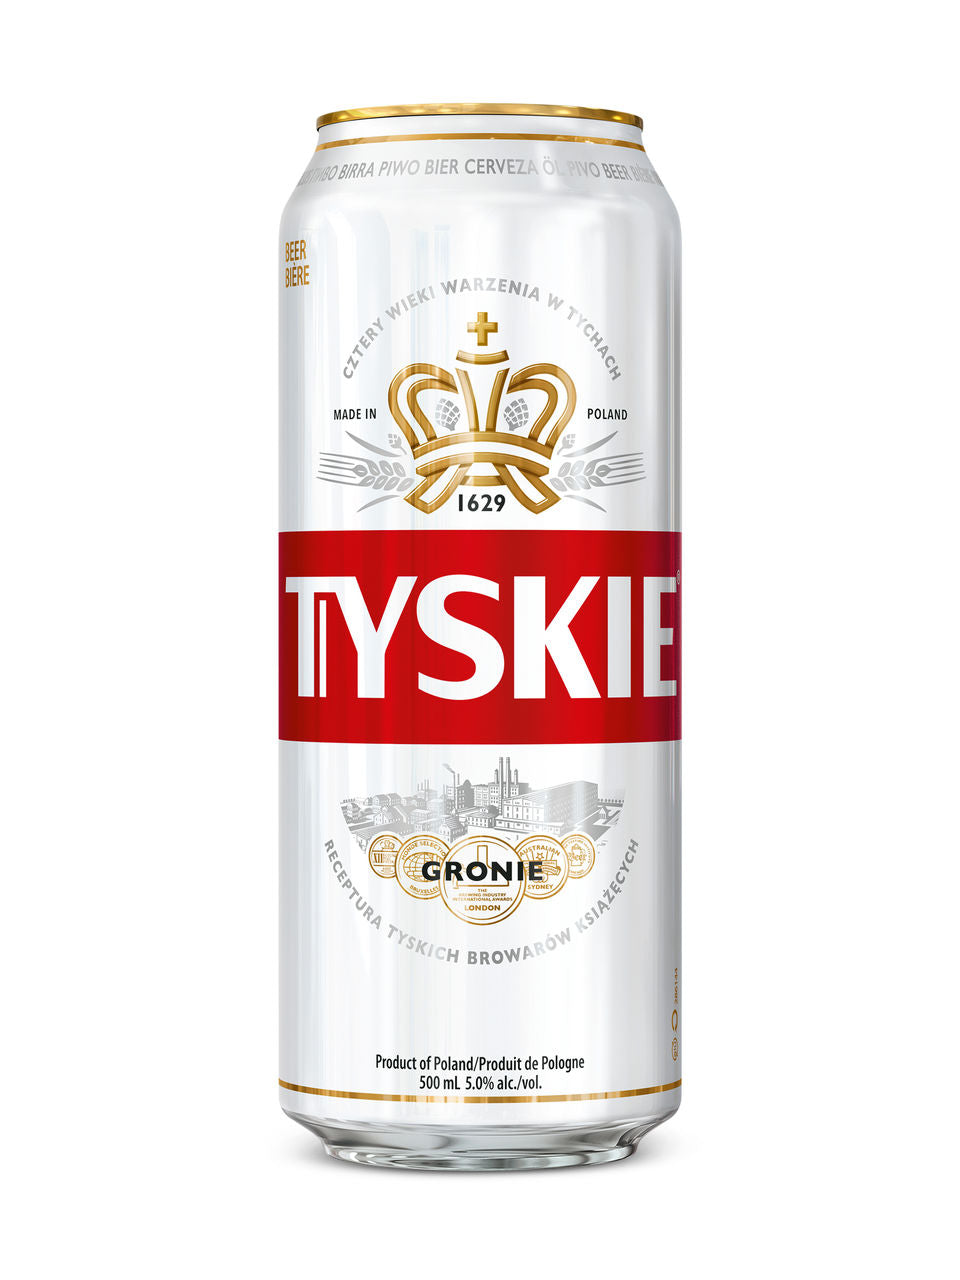 Tyskie Beer 500 mL can